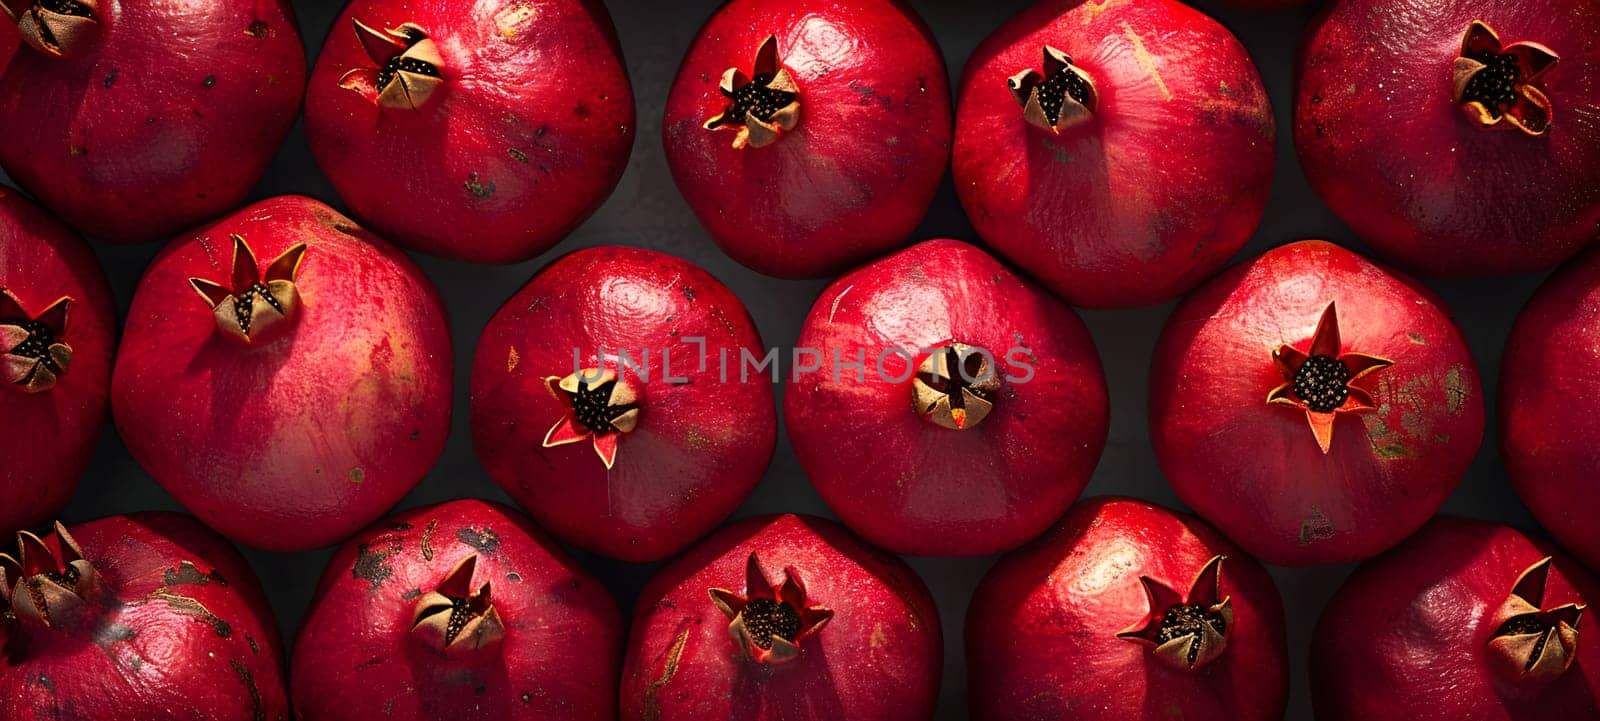 A pile of vibrant red pomegranates, a nutrientdense superfood, is displayed on a table. These seedless fruits are rich in antioxidants and considered a staple in natural foods